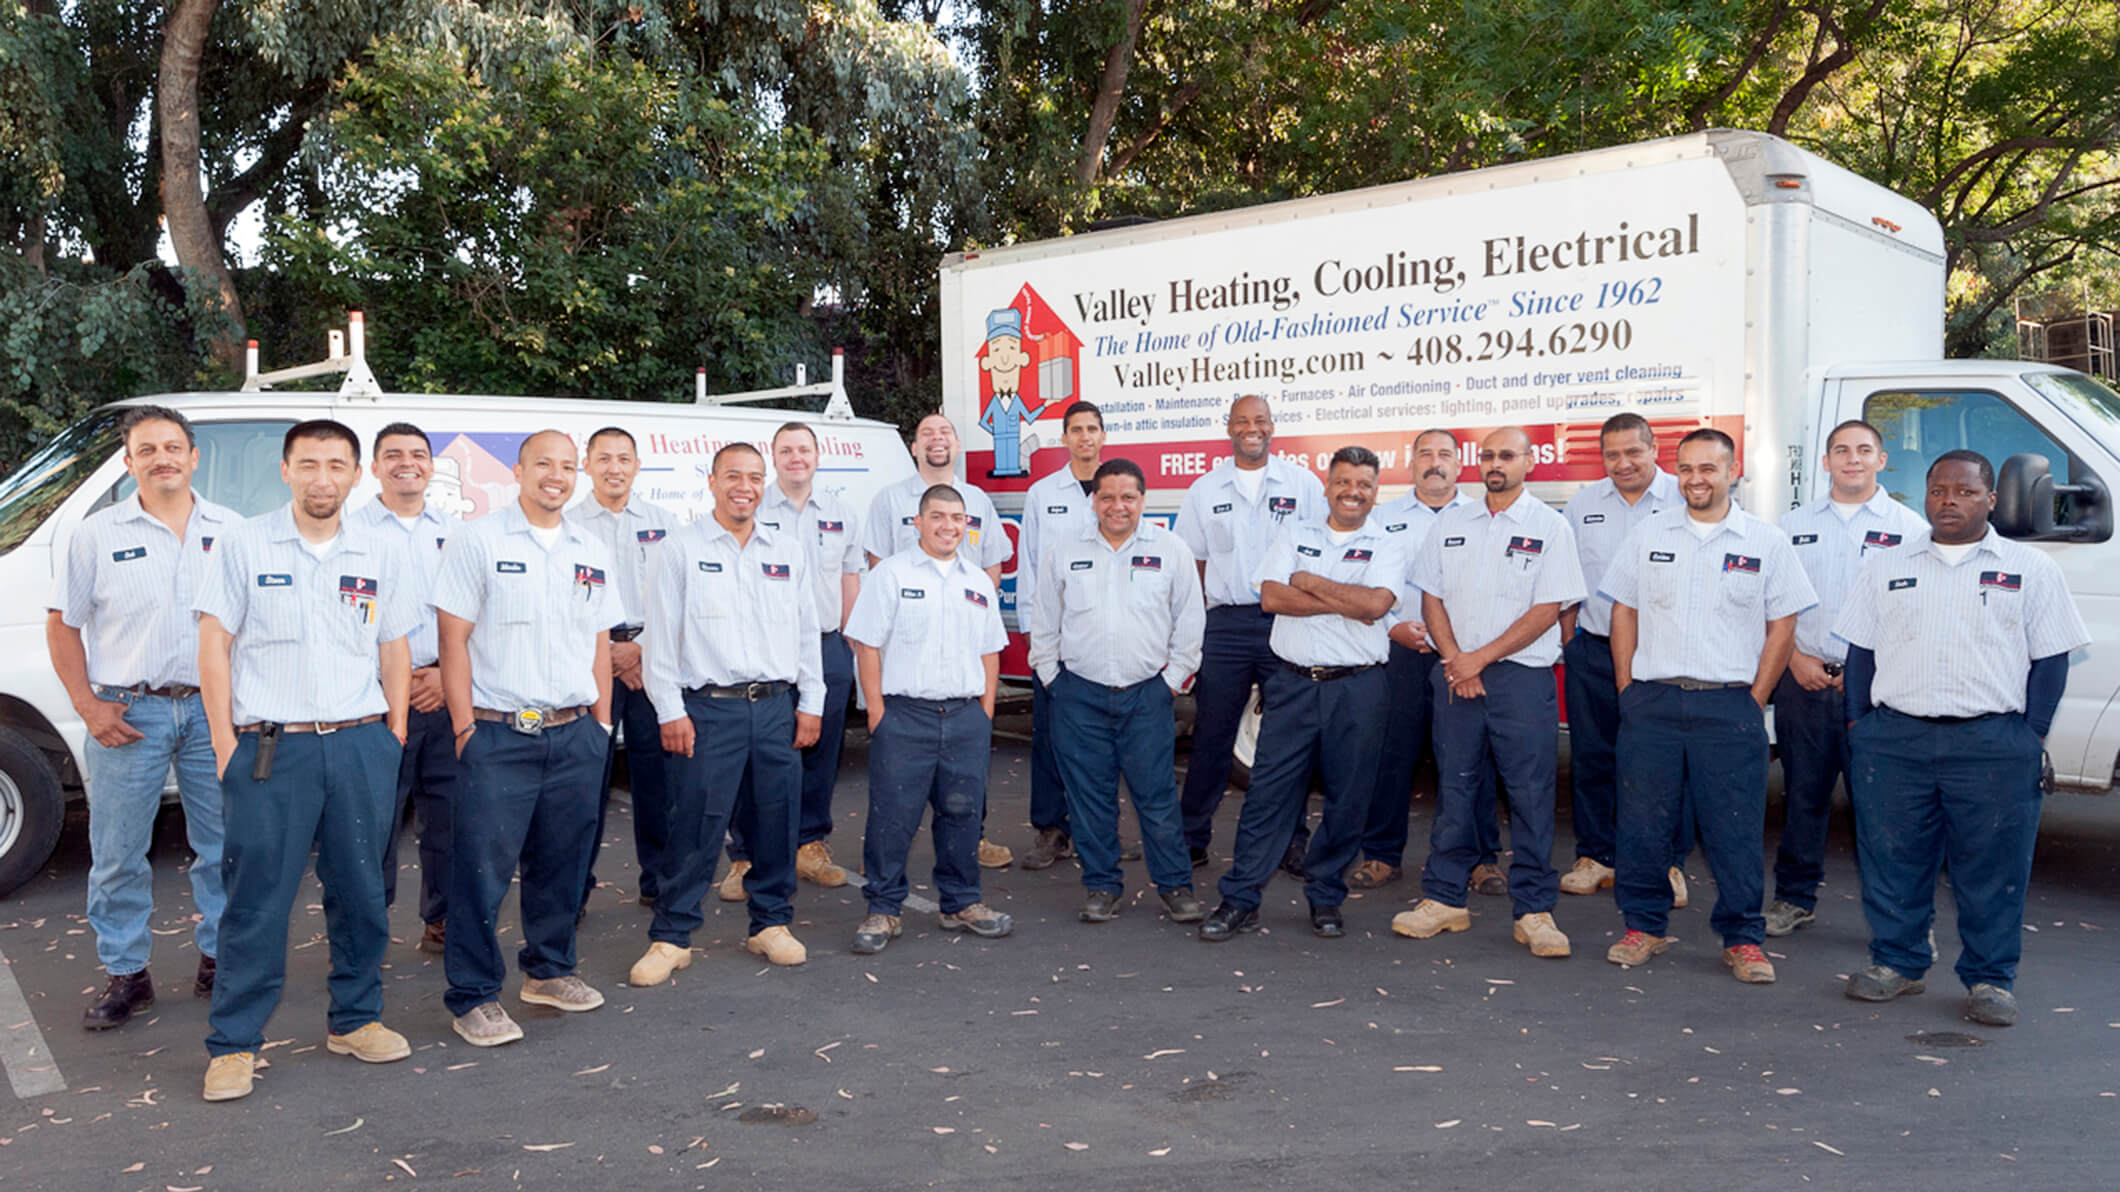 Valley Heating, Cooling, Electrical and Solar Team